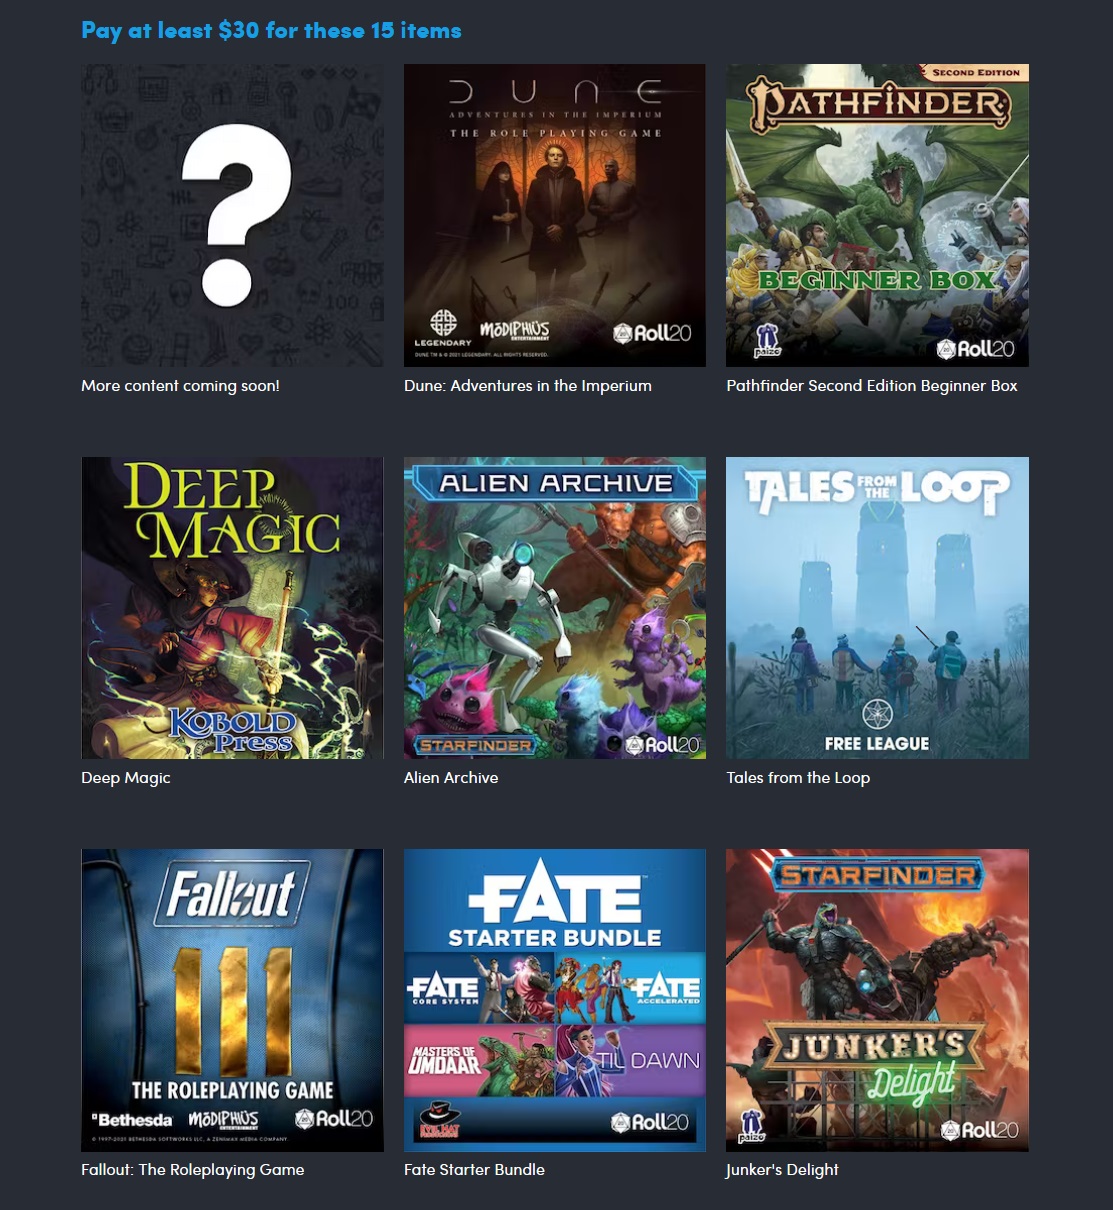 Get everything you need to play Pathfinder for $5 in this Humble Bundle